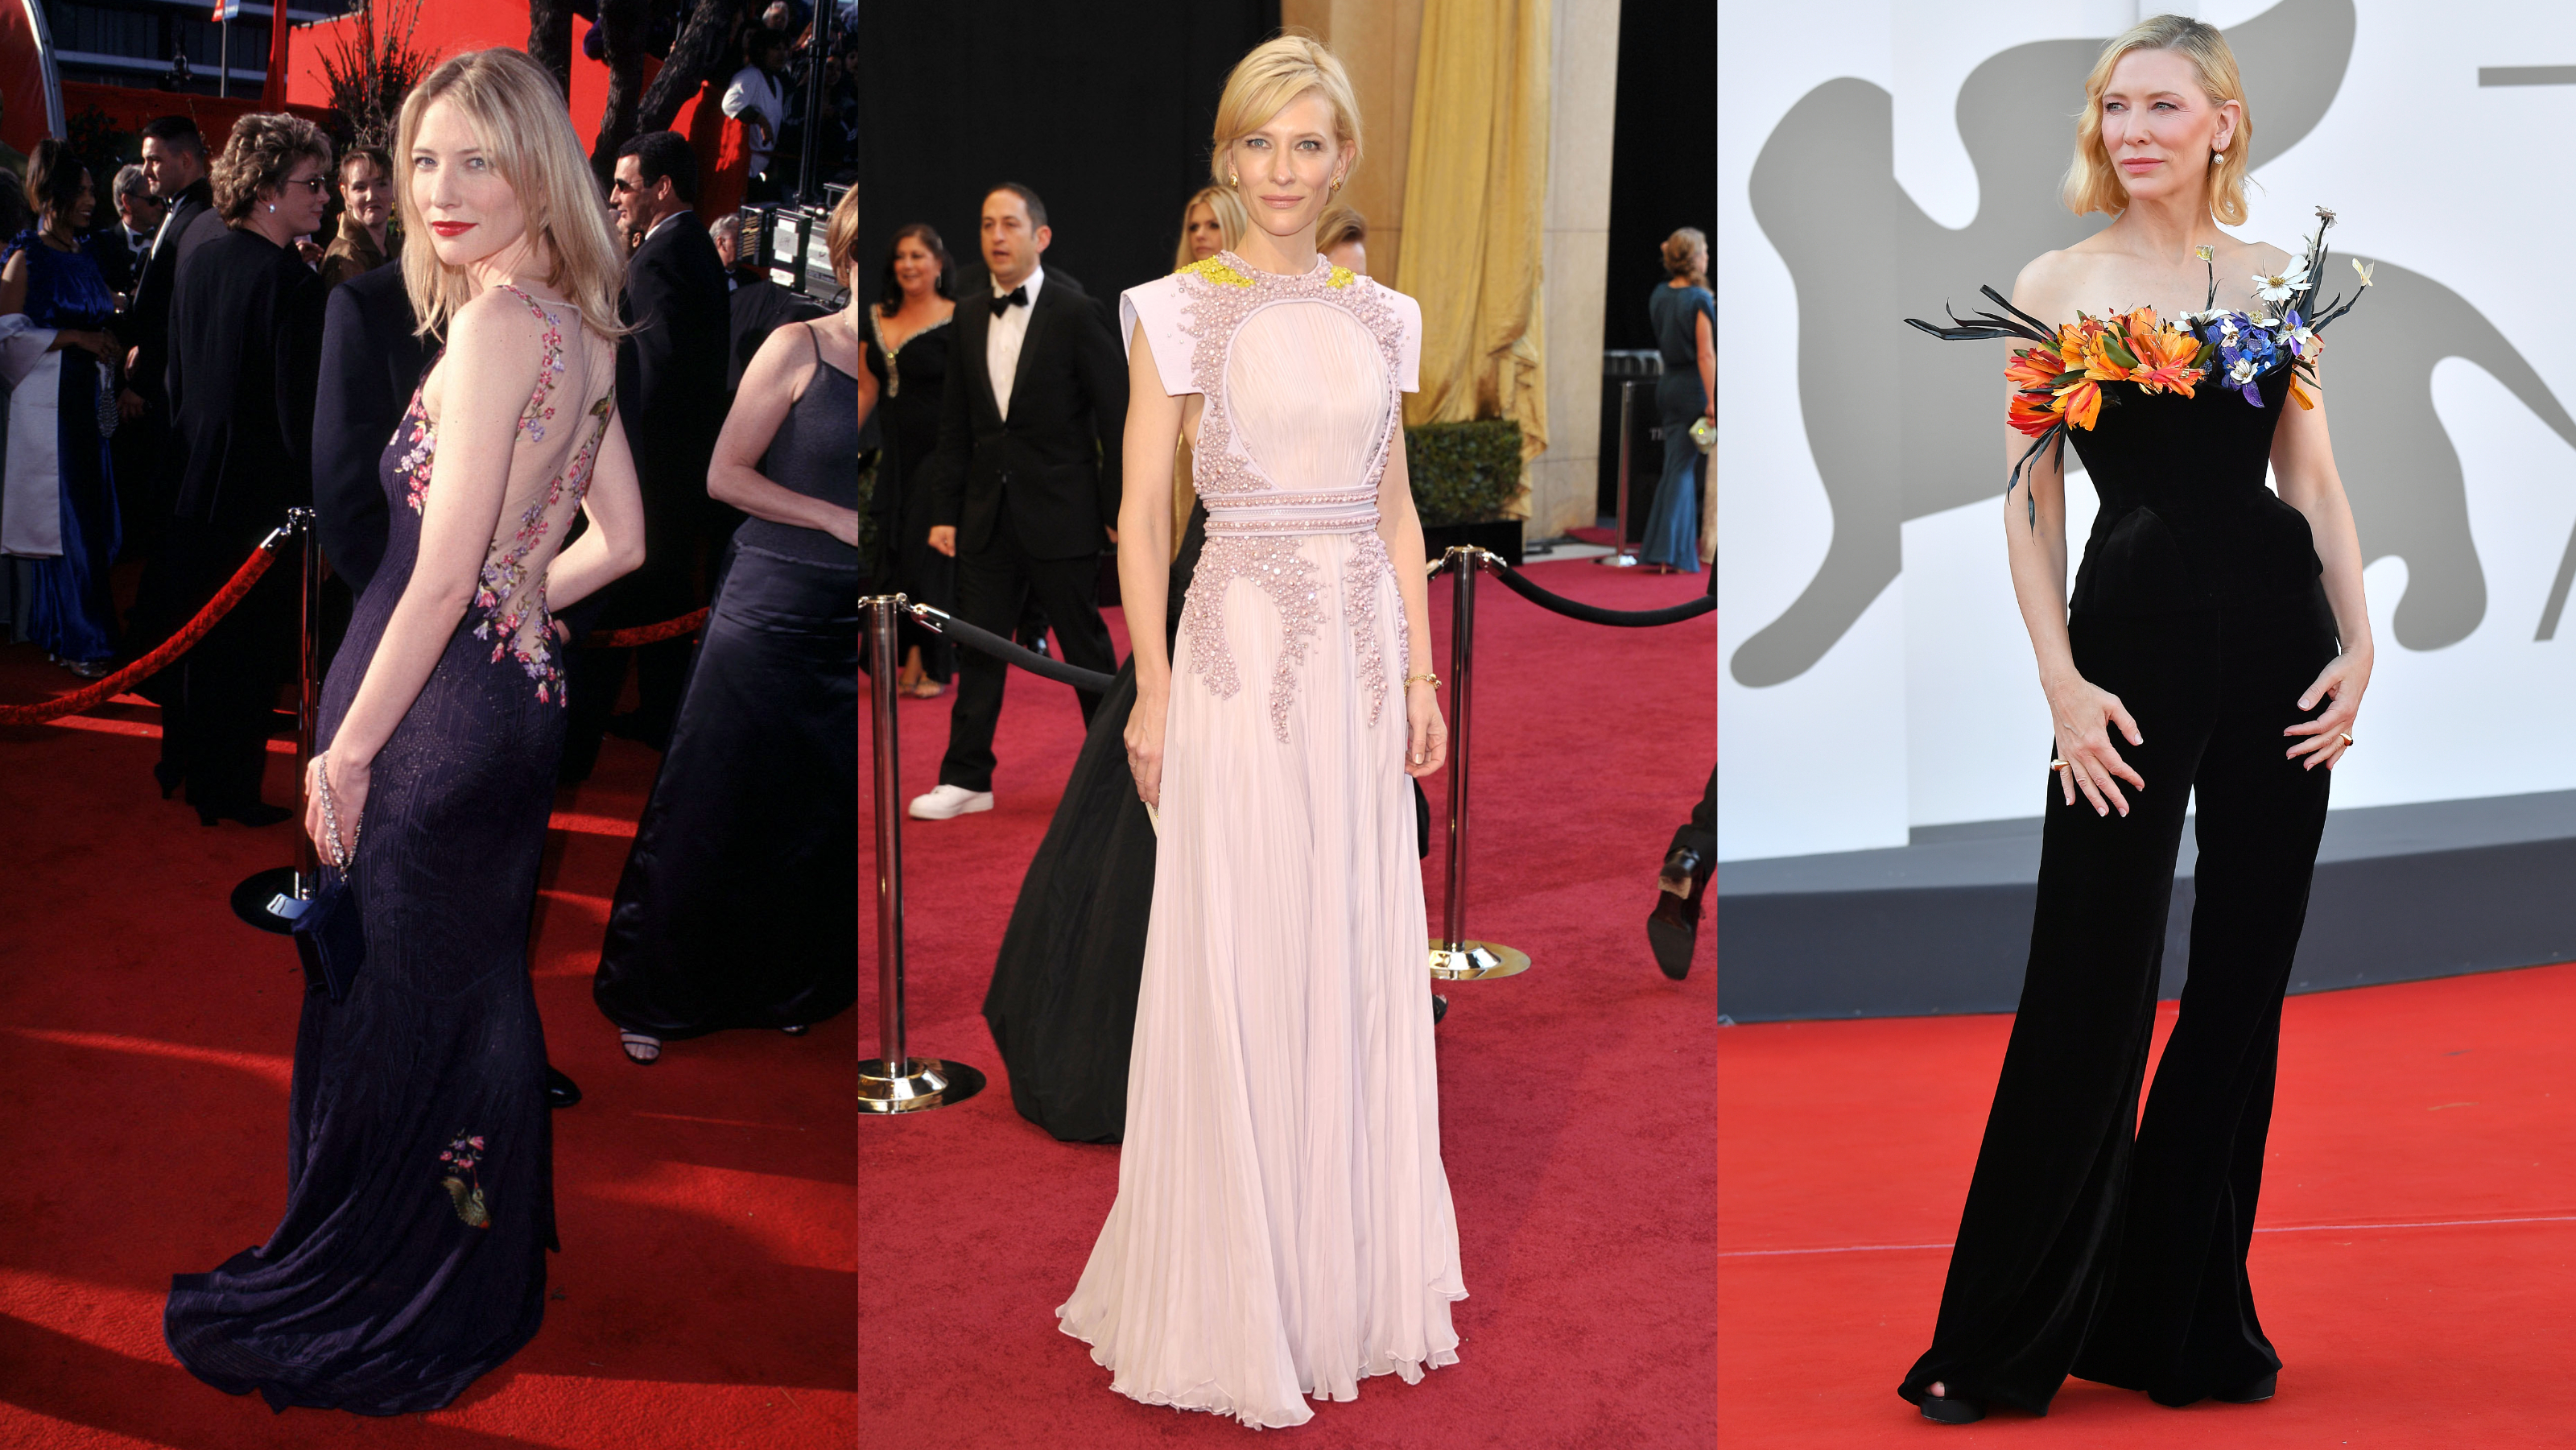 Ball Gowns Galore! And Other Cannes Film Festival Fashion - The